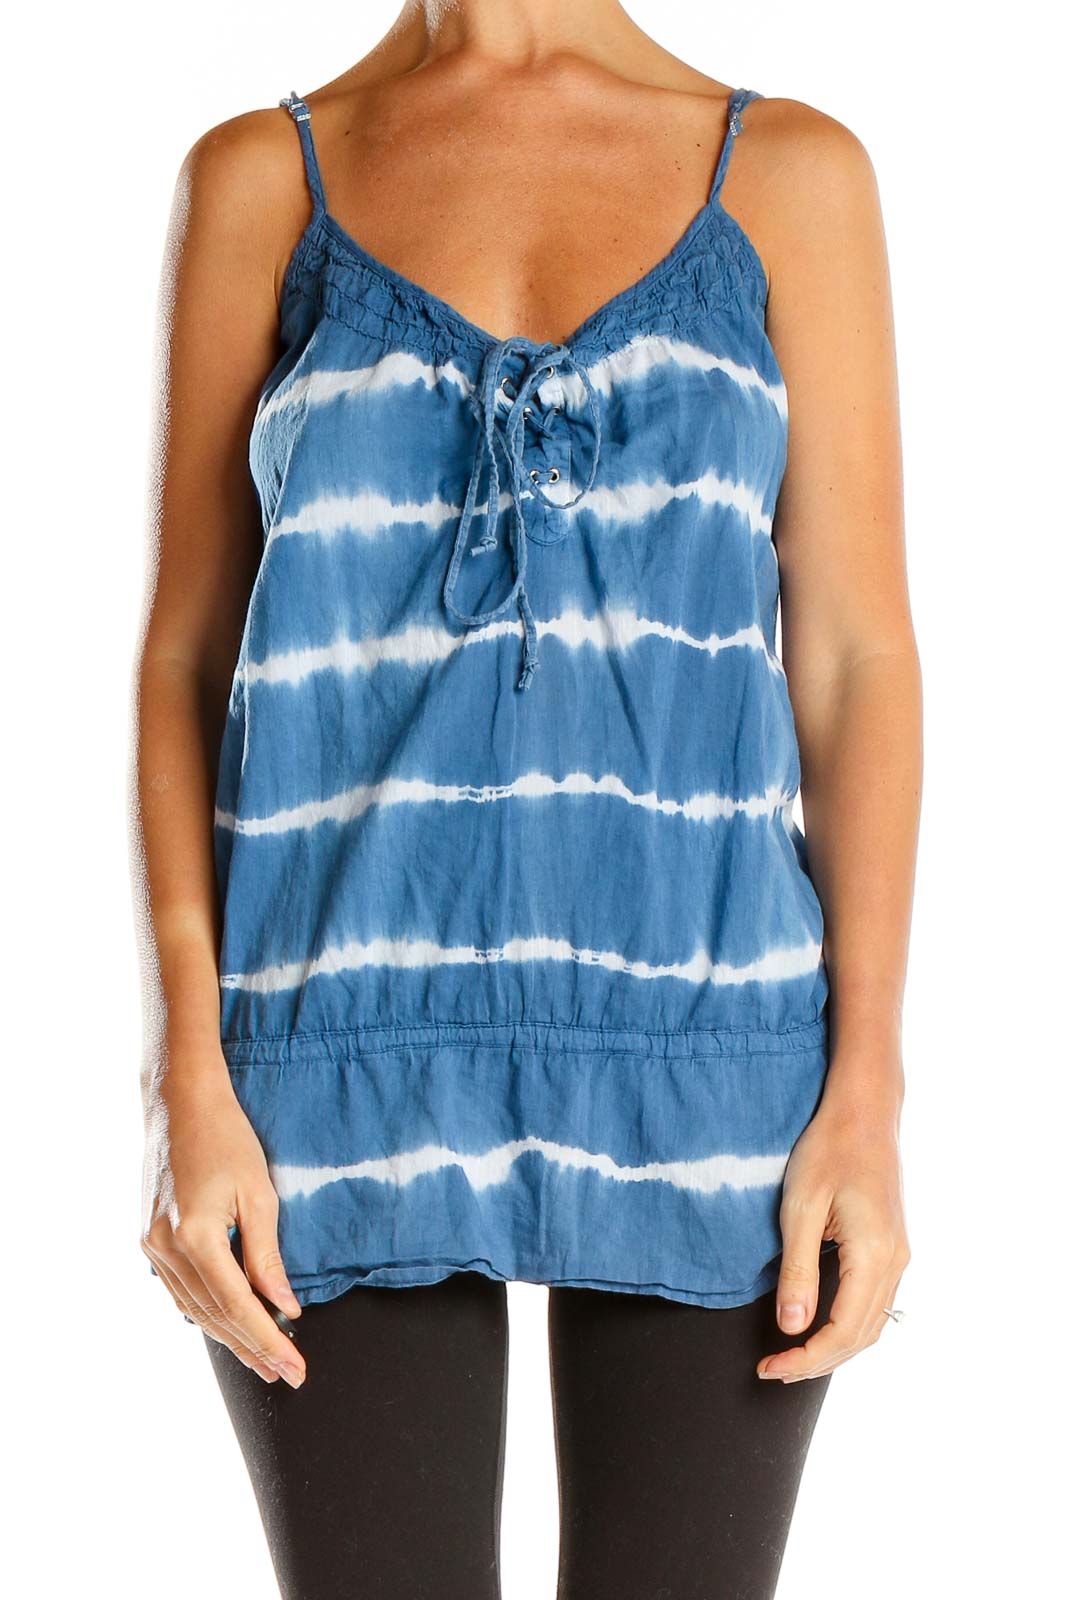 Blue Striped Tie And Dye Tank Top Front